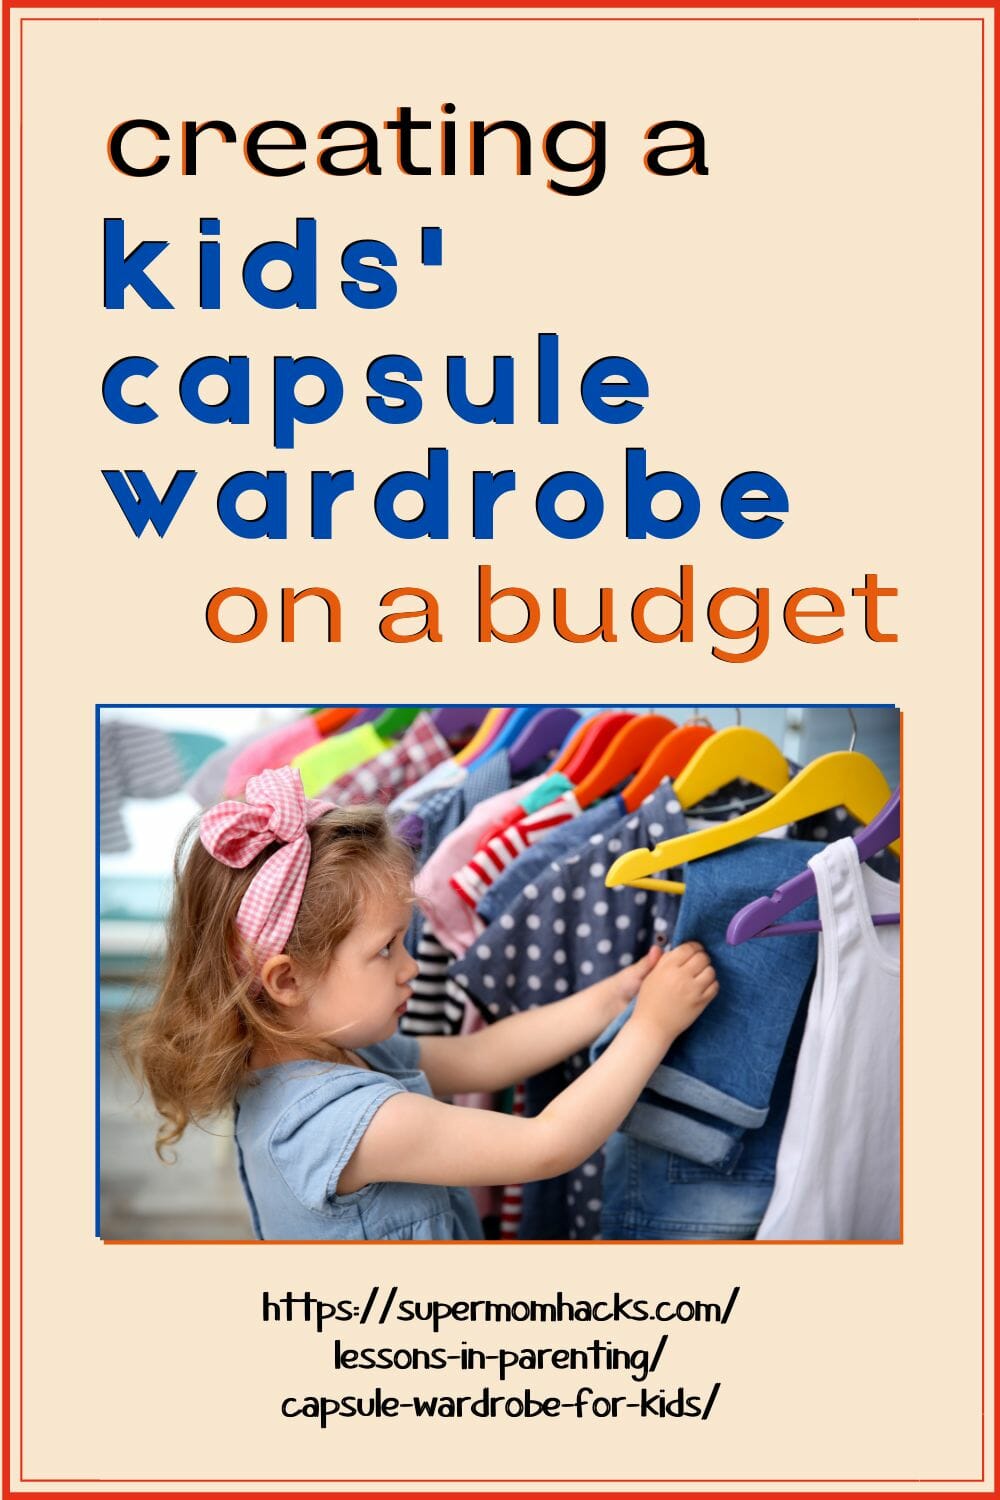 Creating a capsule wardrobe for your kids, whether they're infants or tweens, is a great way to save time, money, and mess; here's how.